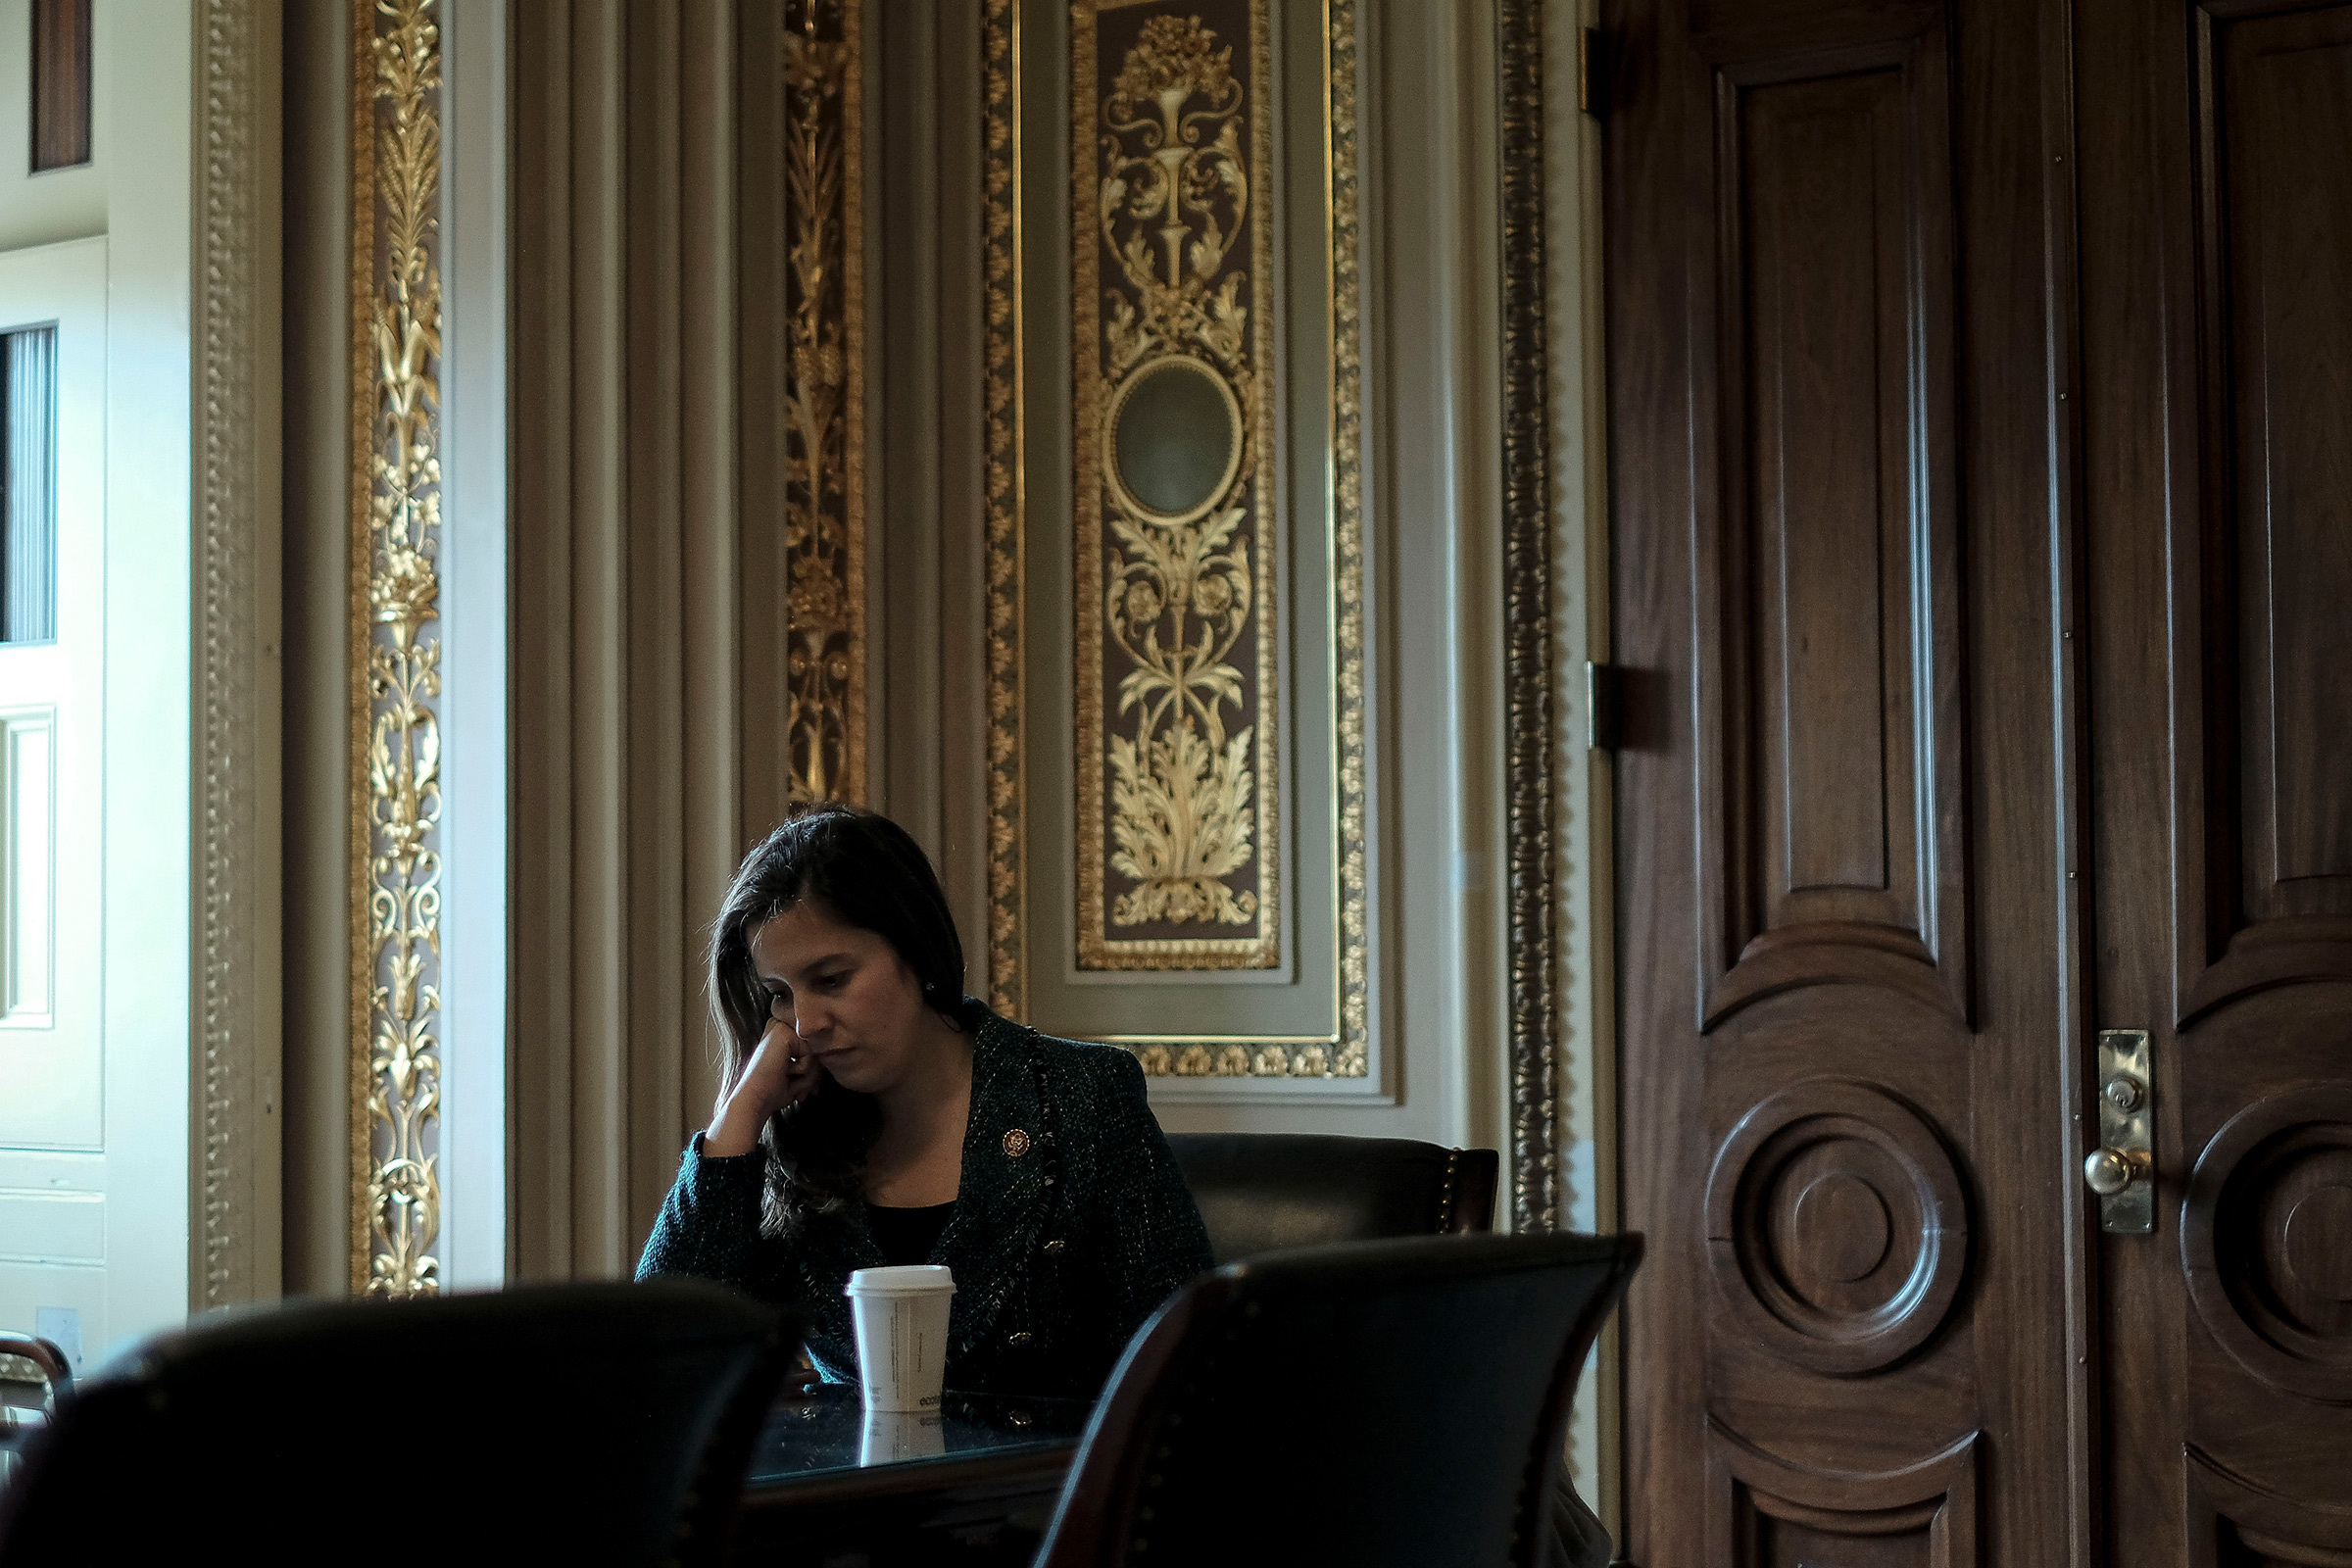 Rep. Elise Stefanik (R-N.Y.), an advisor to Trump's defense team, sits with her staffers outside the defense team meeting room before the impeachment trial at the Capitol in Washington, D.C., on Jan. 24, 2020. (Gabriella Demczuk for TIME)